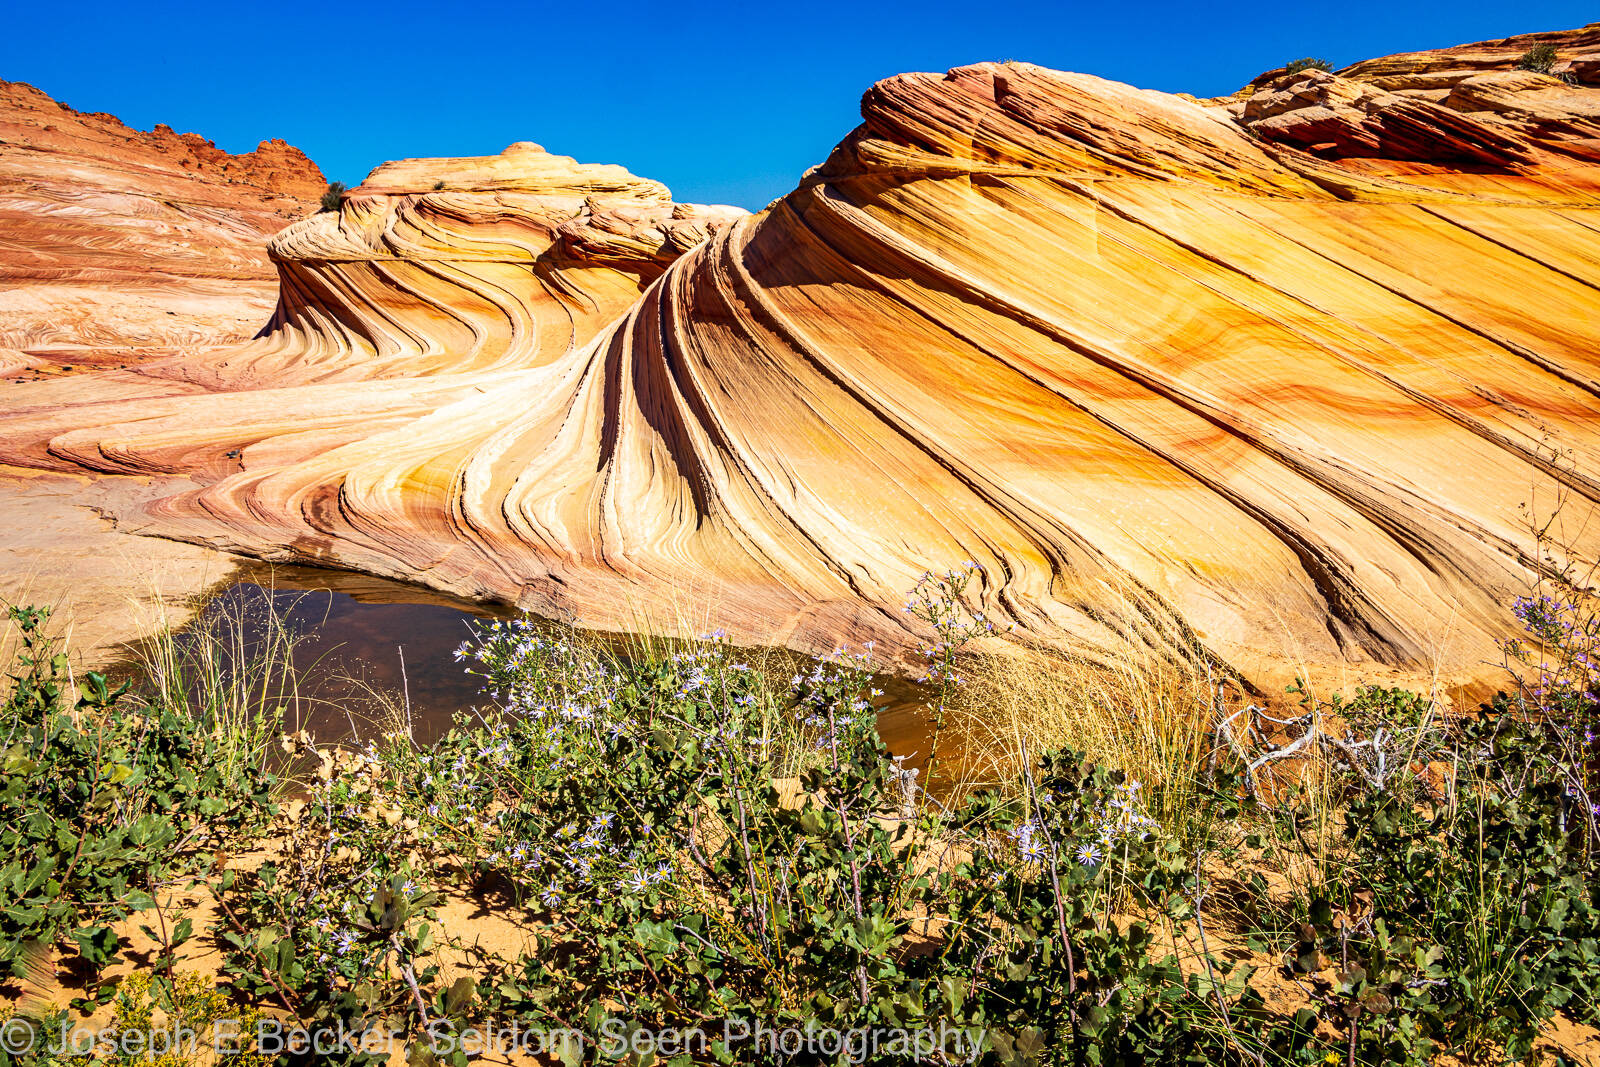 Image of Coyote Buttes North - The Second Wave by Joe Becker